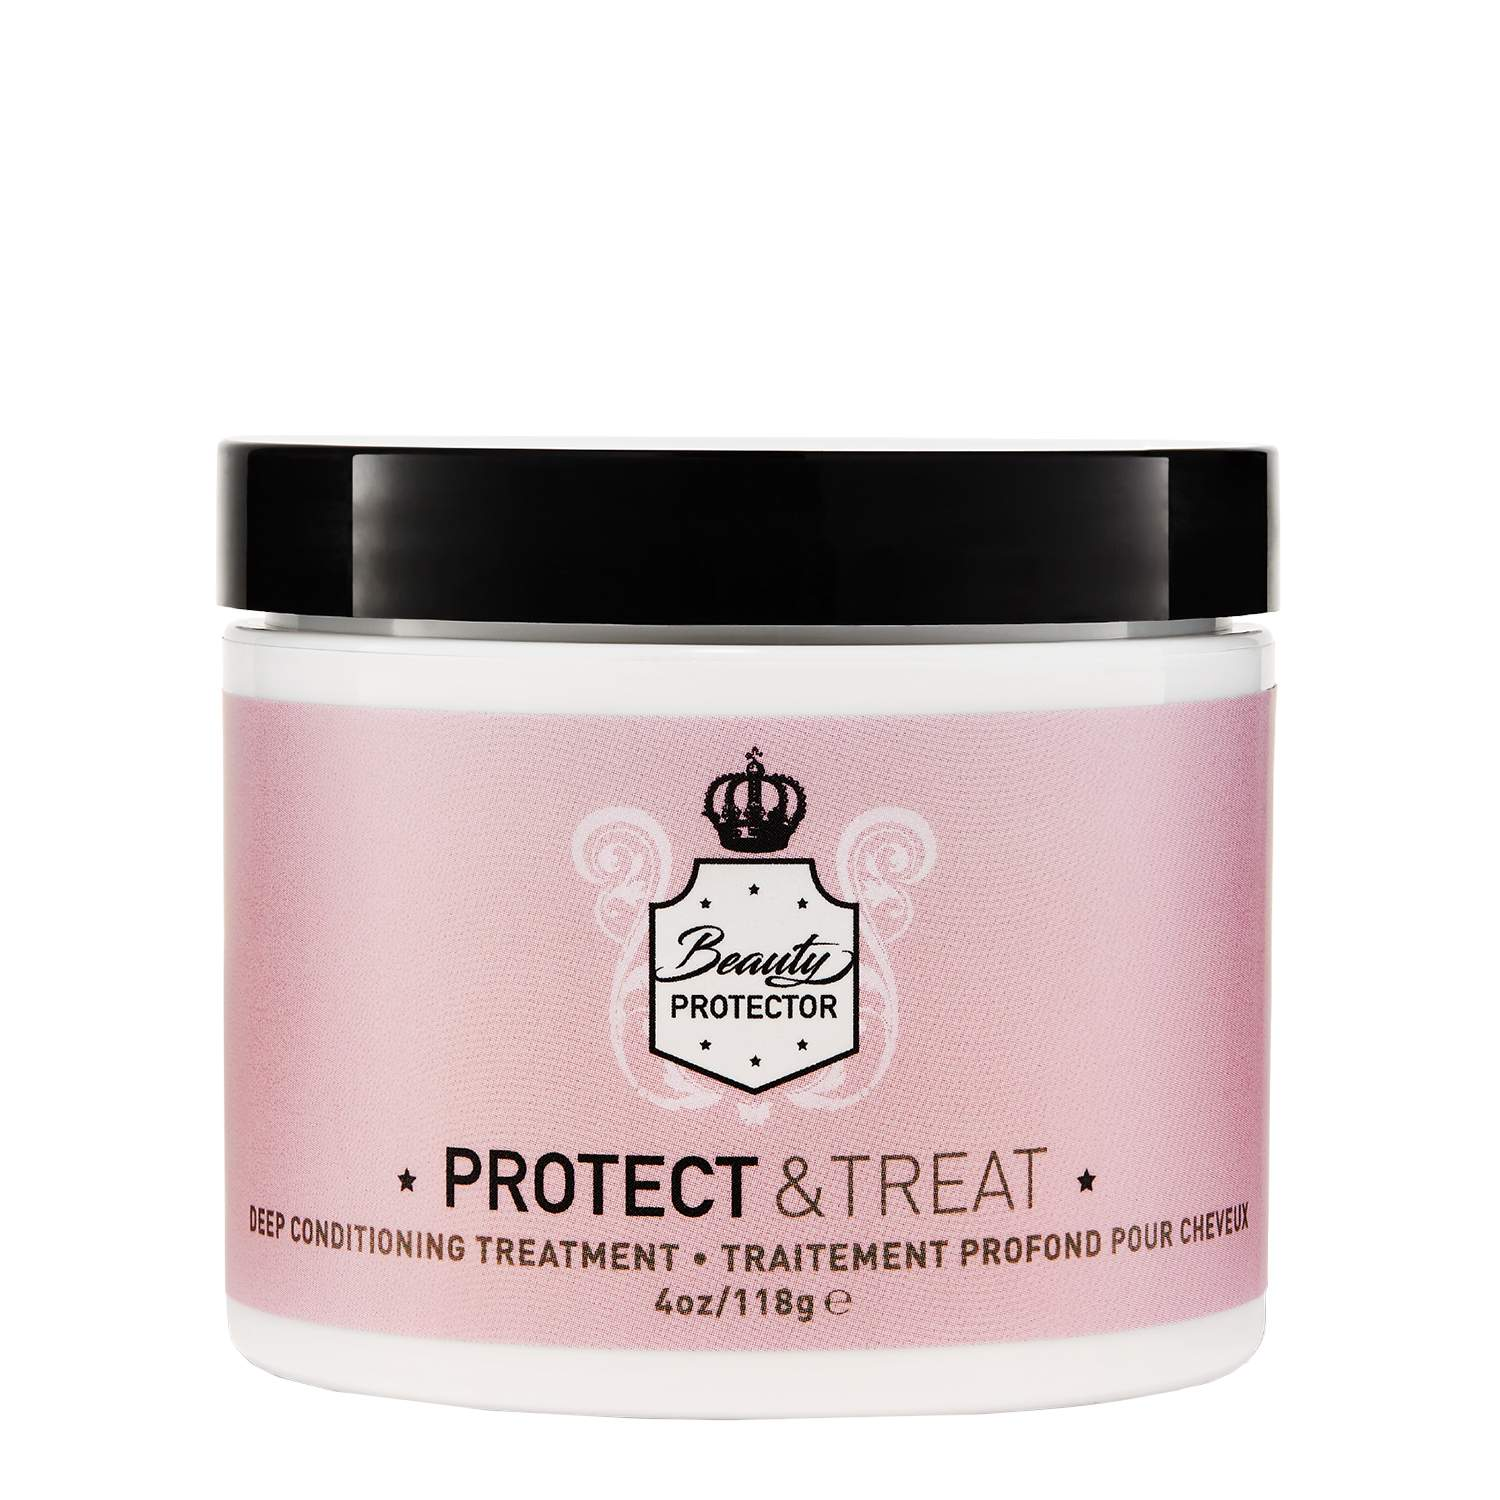 Protect & Treat Mask Beauty Protector Protect & Treat Mask 1